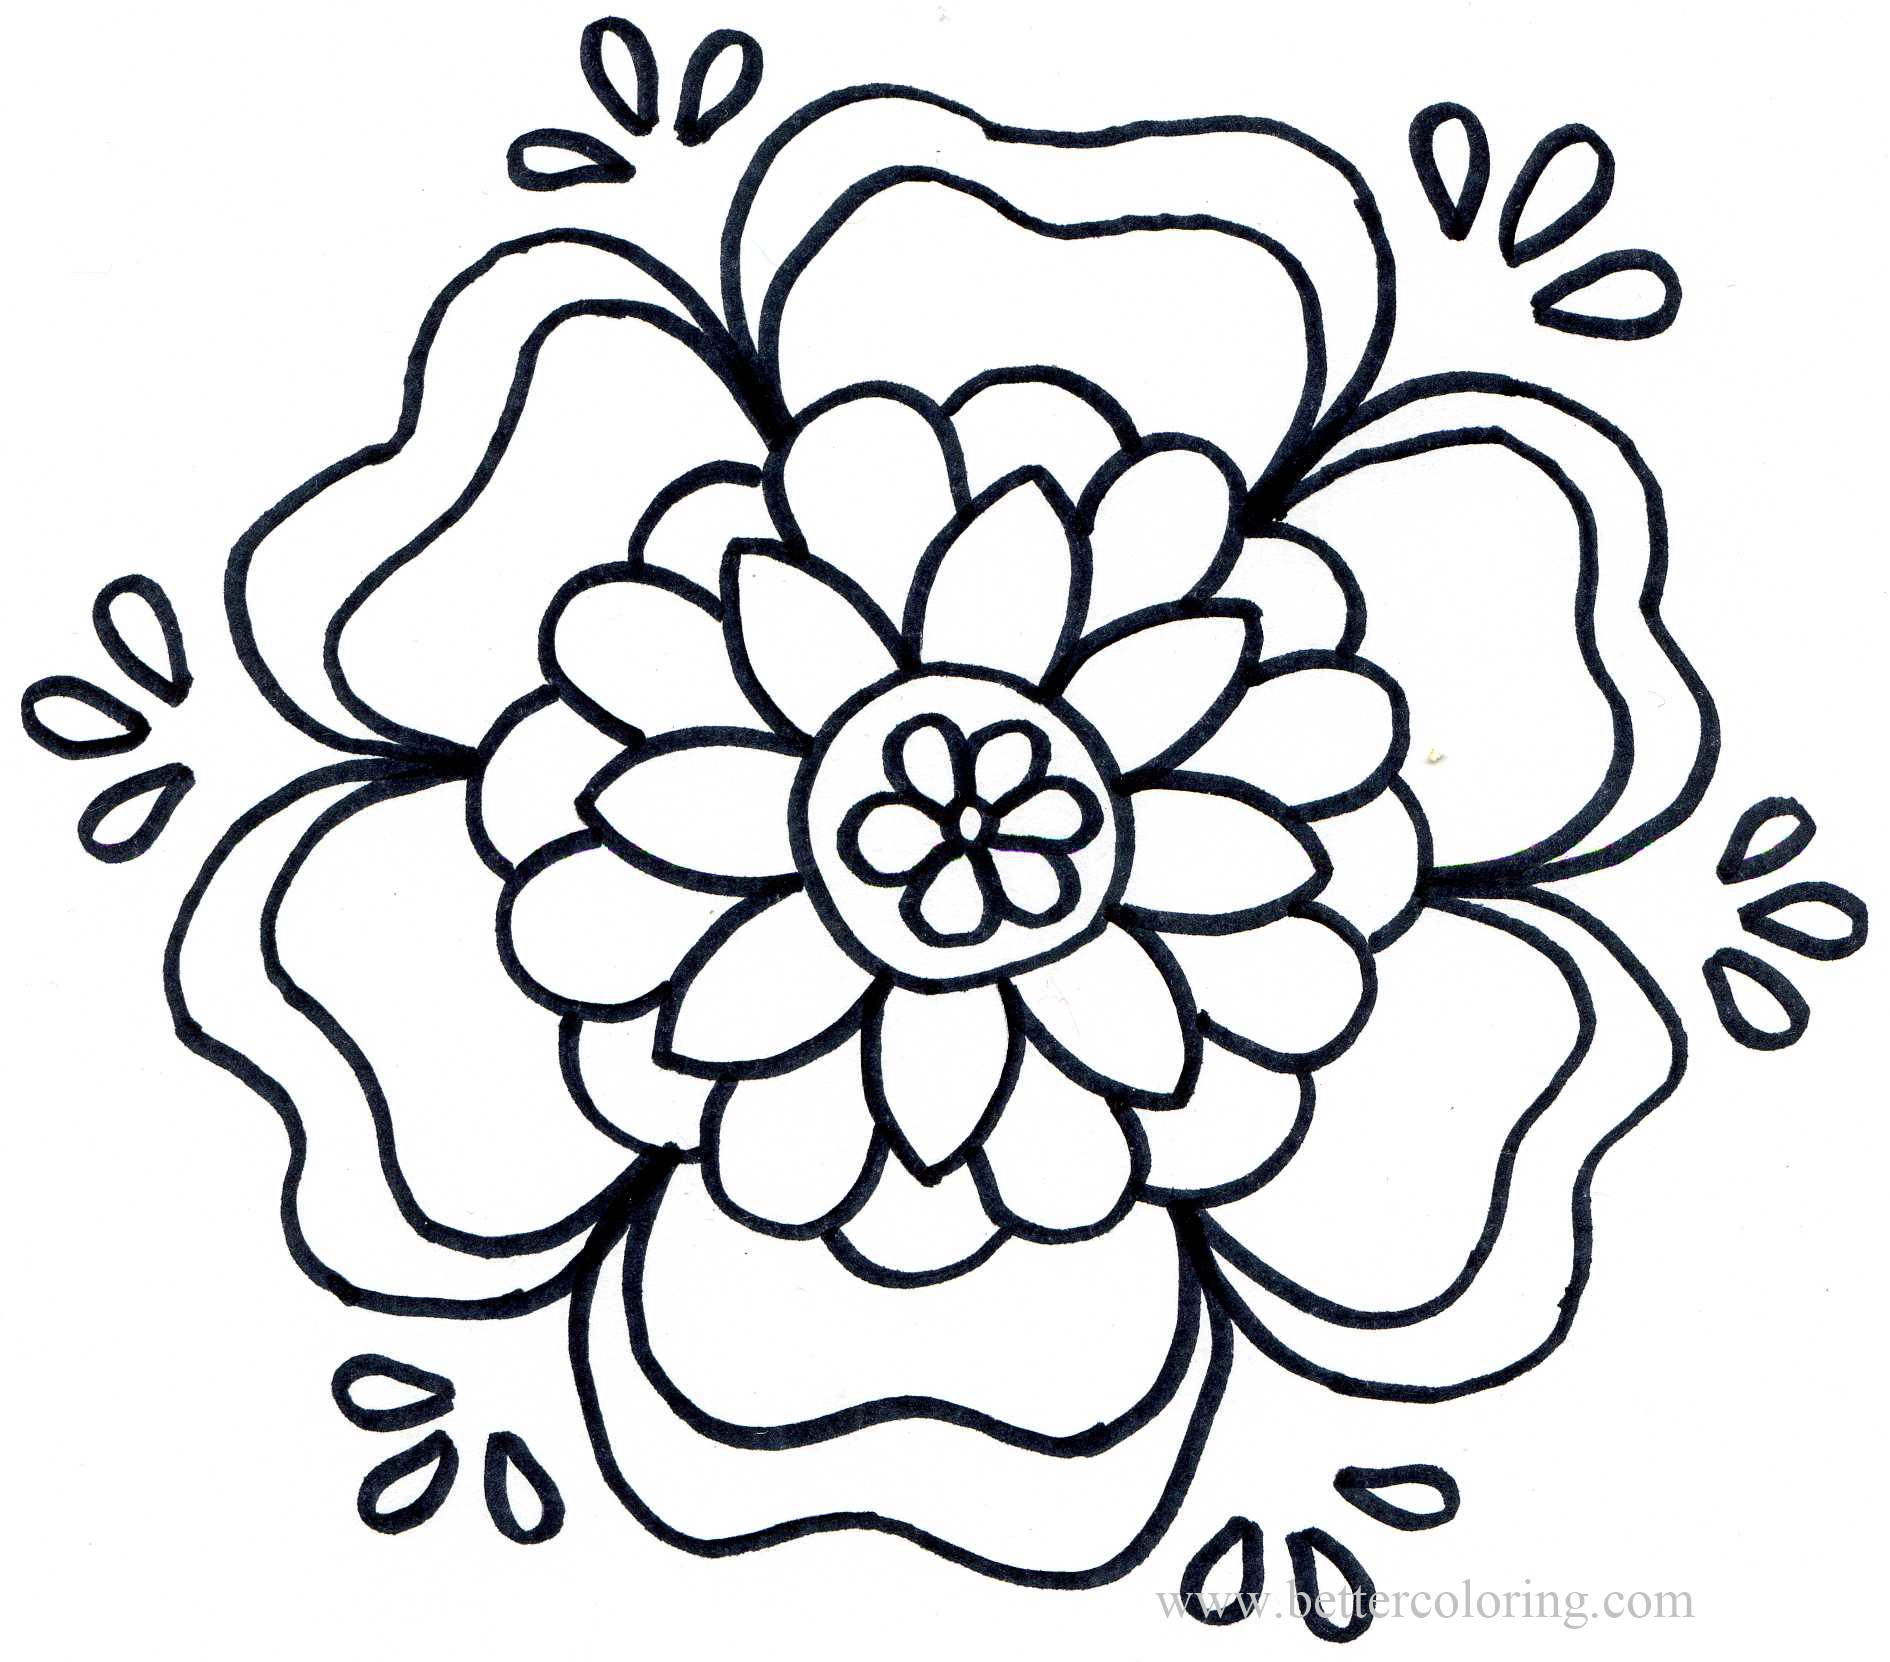 Free Sharpie Drawing Flower Coloring Pages printable